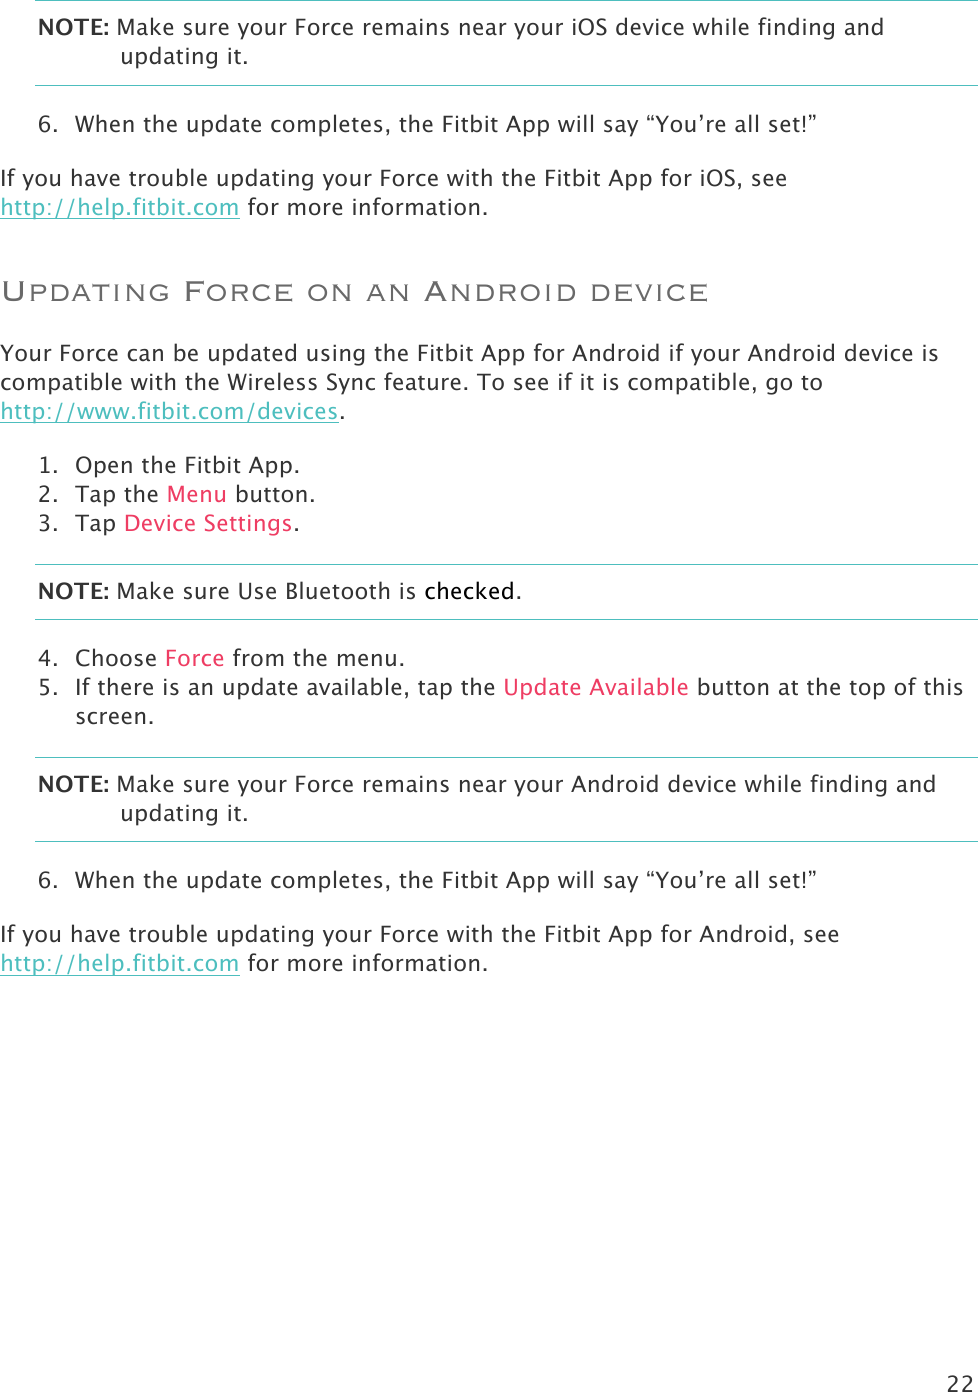 22  NOTE: Make sure your Force remains near your iOS device while finding and updating it.  6. When the update completes, the Fitbit App will say “You’re all set!” If you have trouble updating your Force with the Fitbit App for iOS, see http://help.fitbit.com for more information.  Updating Force on an Android device Your Force can be updated using the Fitbit App for Android if your Android device is compatible with the Wireless Sync feature. To see if it is compatible, go to http://www.fitbit.com/devices.  1. Open the Fitbit App.  2. Tap the Menu button. 3. Tap Device Settings. NOTE: Make sure Use Bluetooth is checked. 4. Choose Force from the menu. 5. If there is an update available, tap the Update Available button at the top of this screen. NOTE: Make sure your Force remains near your Android device while finding and updating it.  6. When the update completes, the Fitbit App will say “You’re all set!” If you have trouble updating your Force with the Fitbit App for Android, see http://help.fitbit.com for more information.  